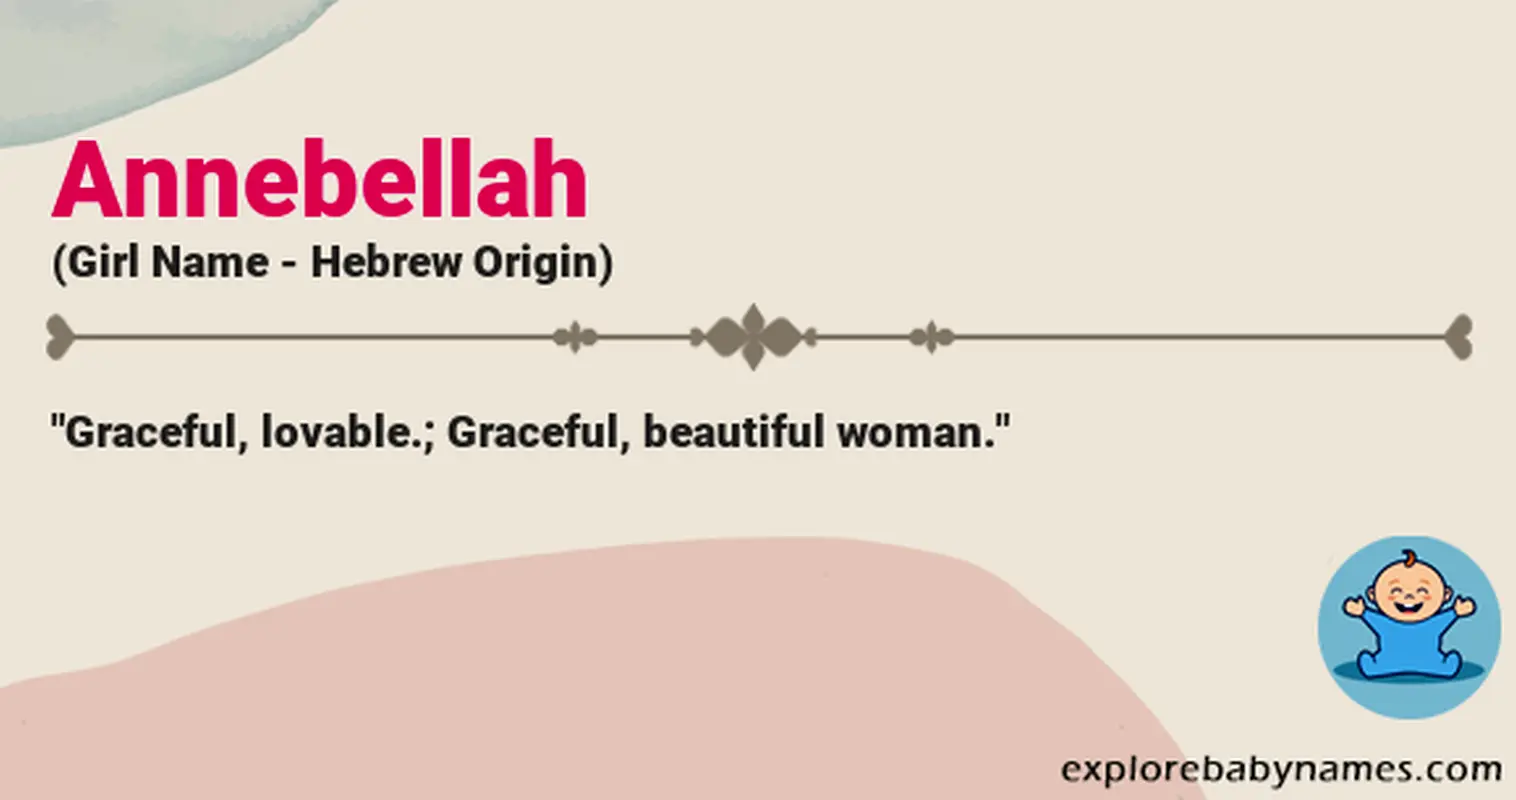 Meaning of Annebellah